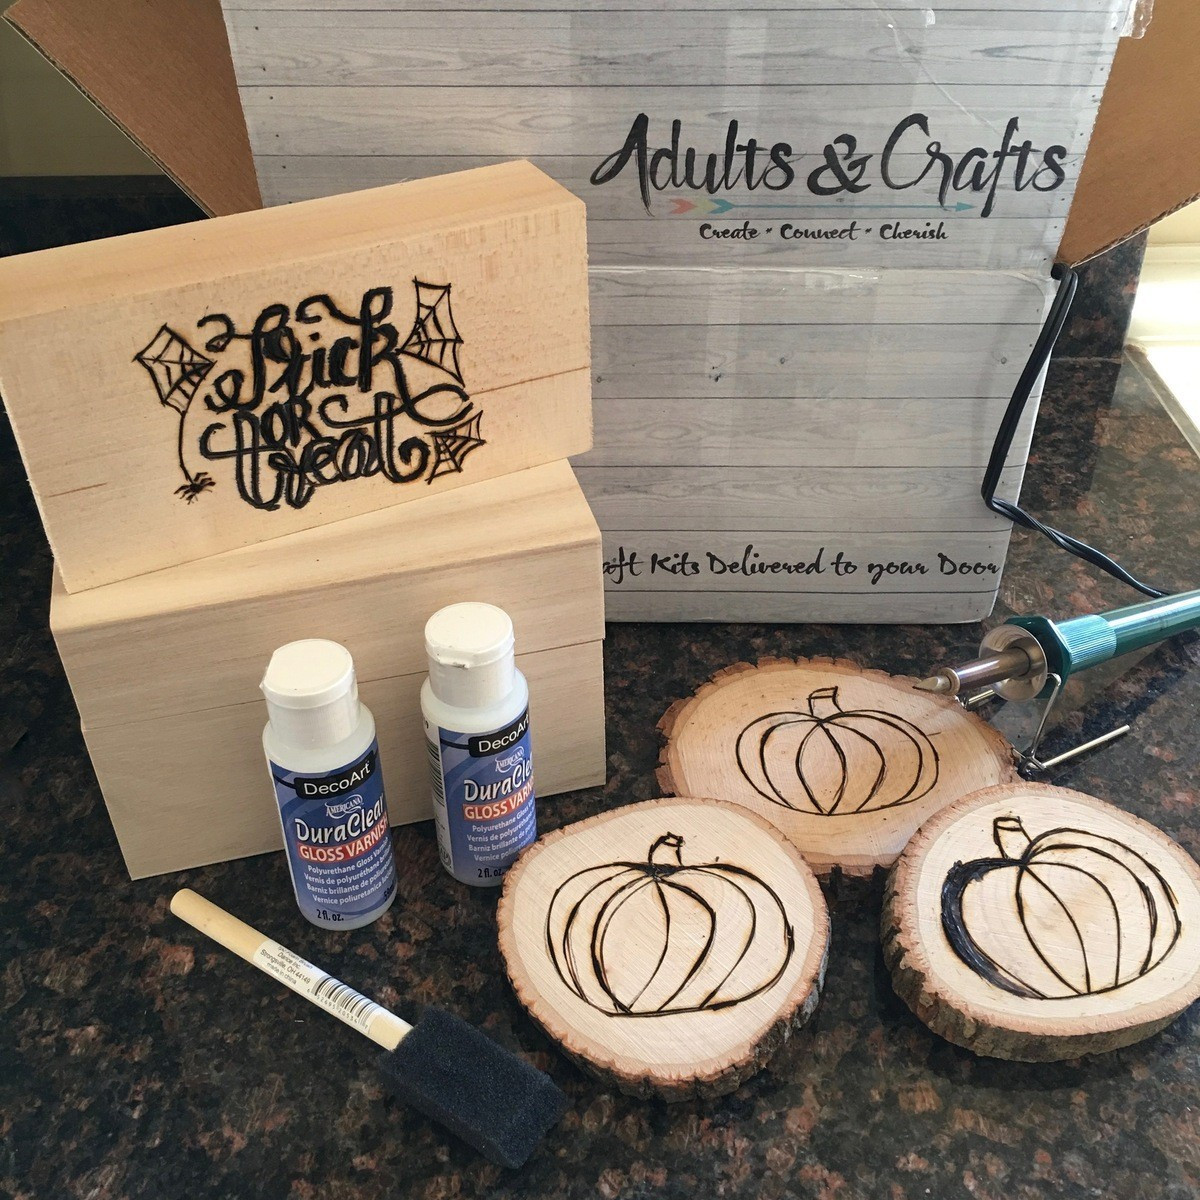 Wood Craft Ideas For Adults
 Adults & Crafts Review Wood Burning 3 Pack Kit